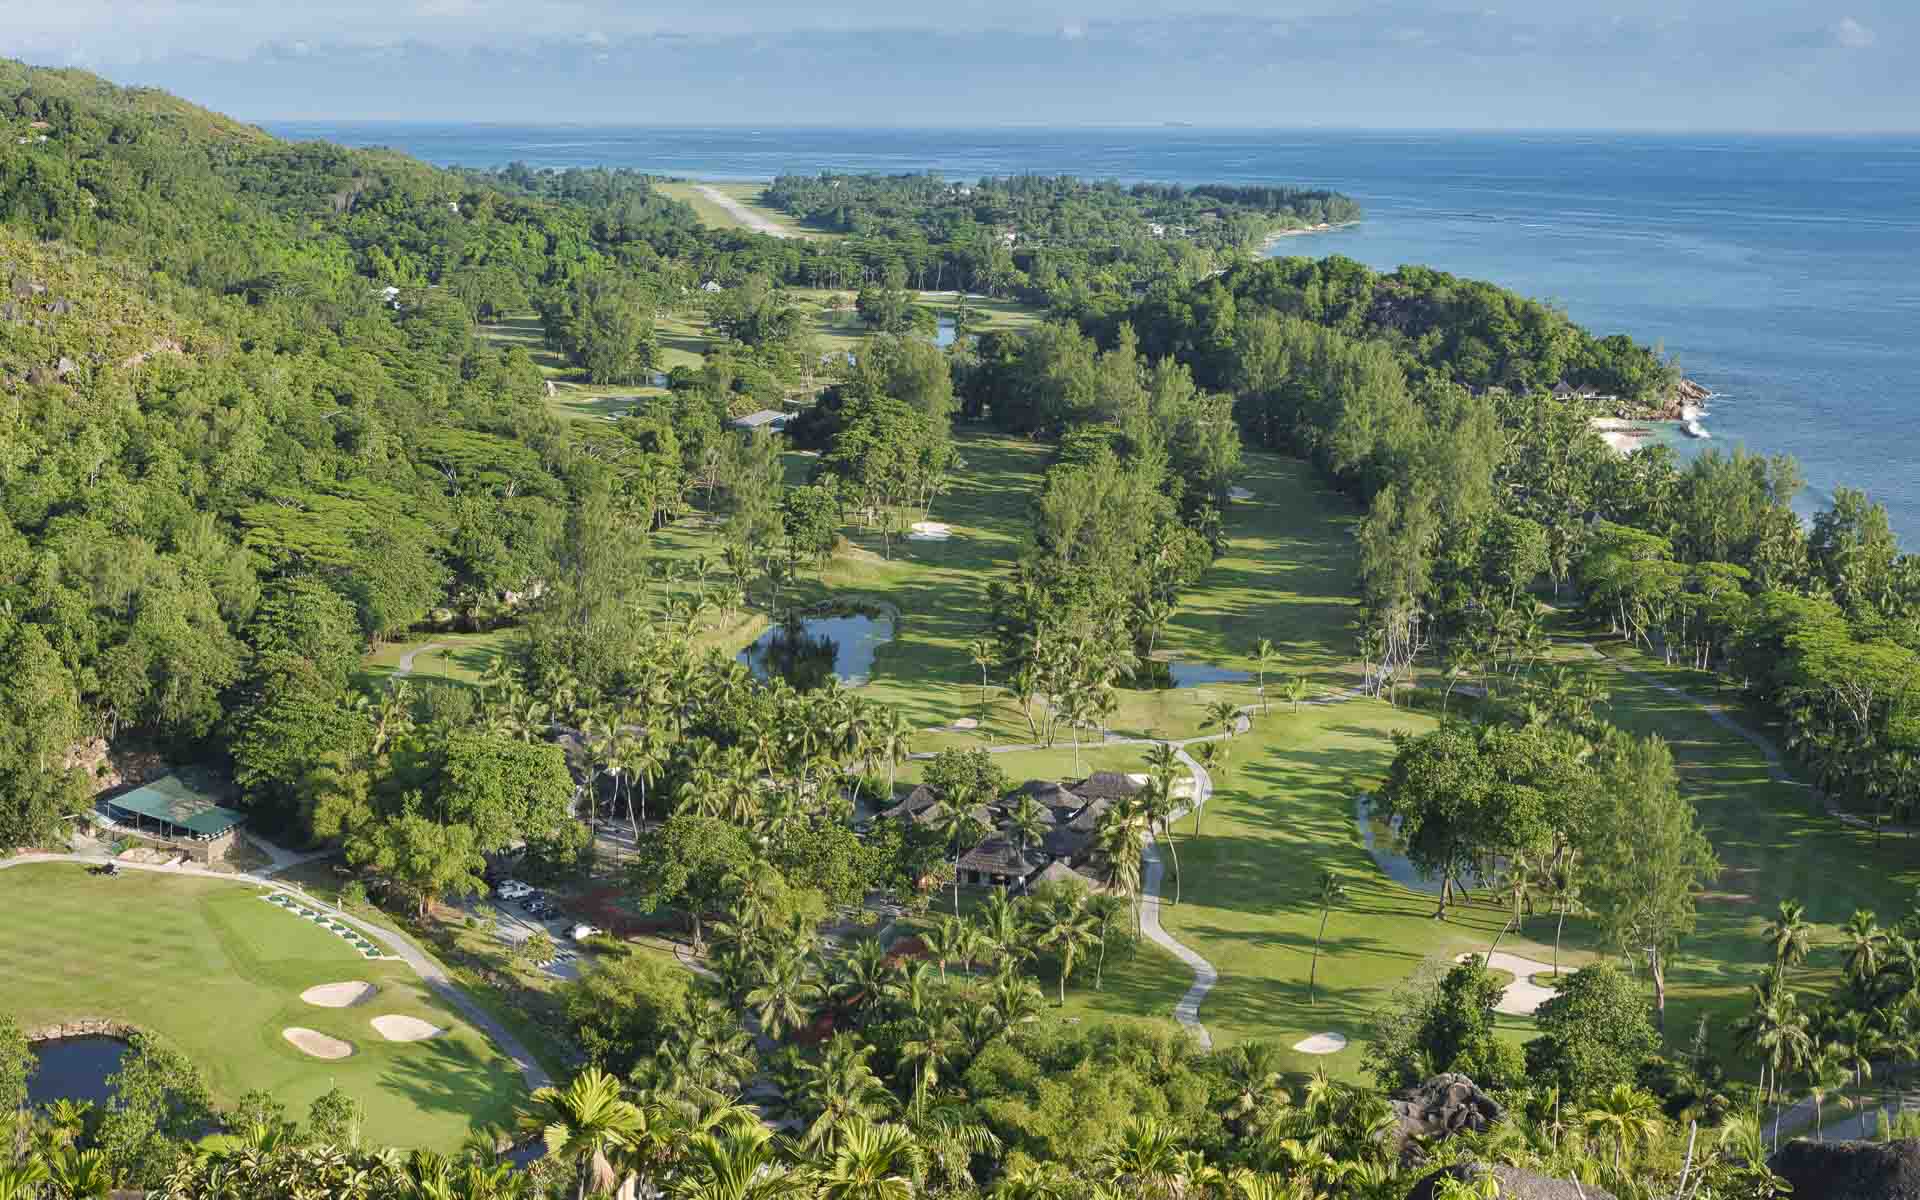 A view of the Constance Lemuria golf course with the Indian Ocean